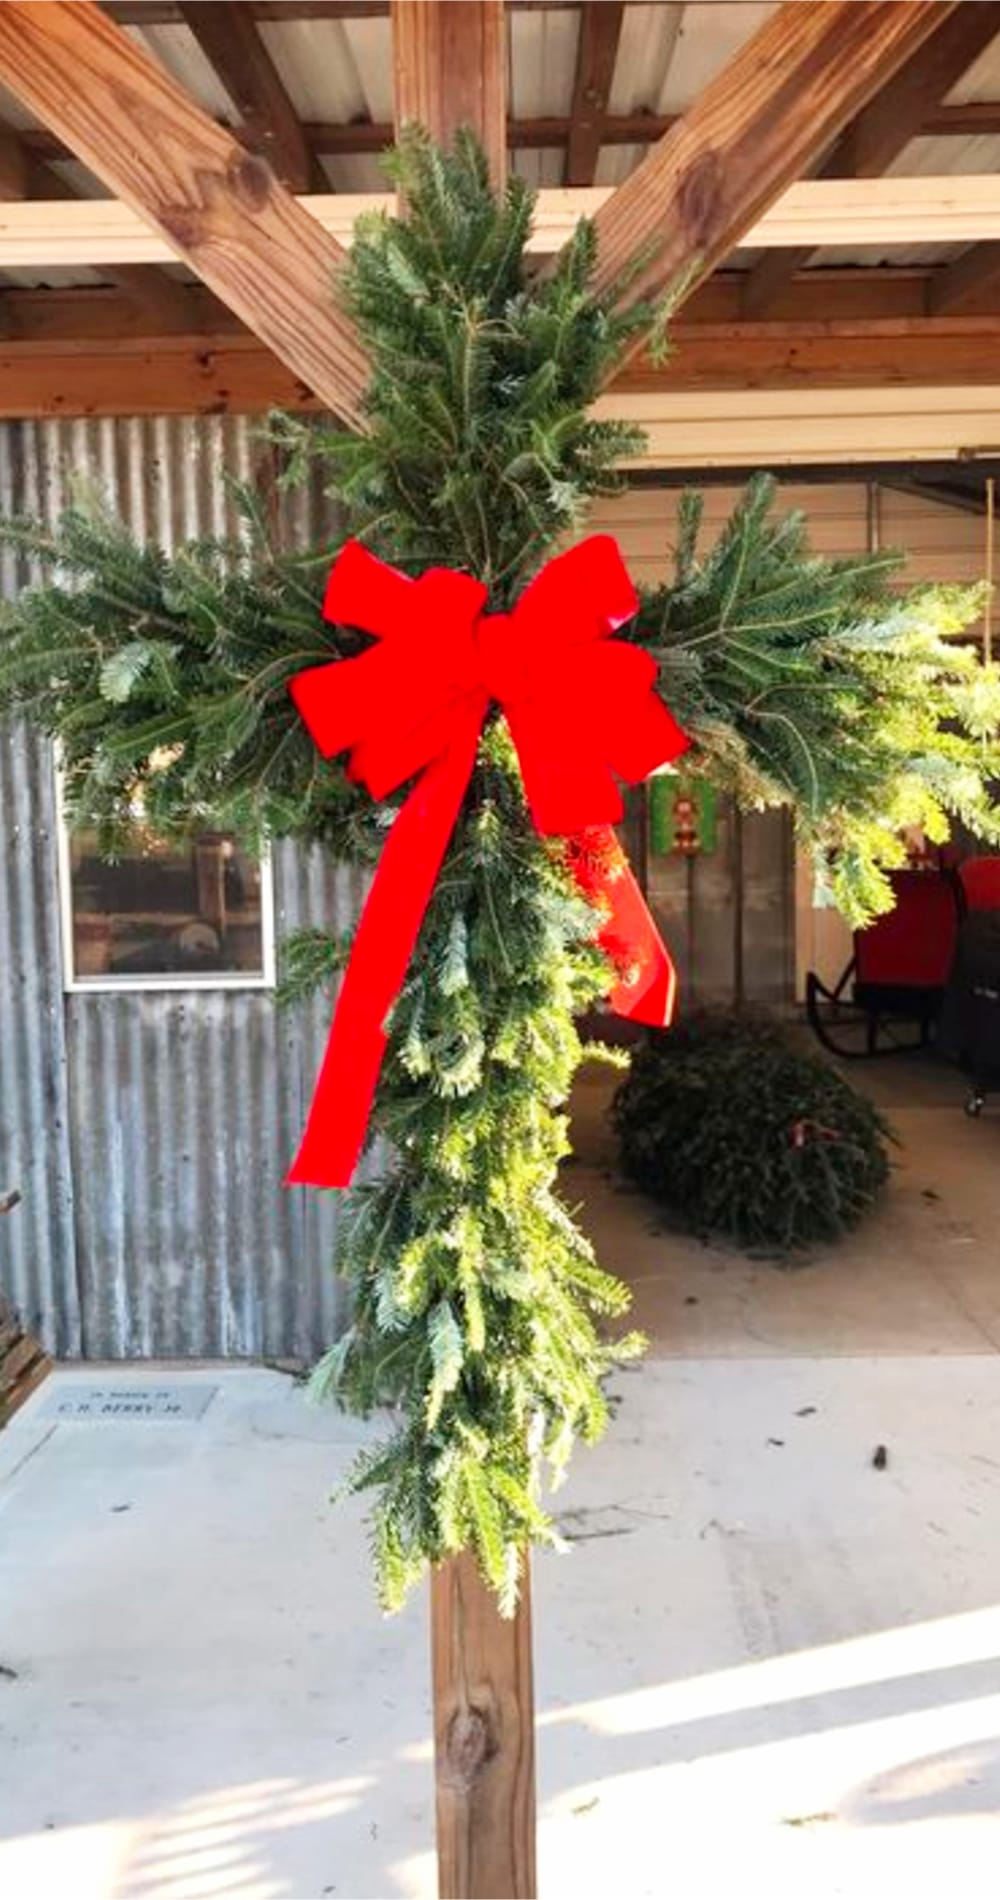 Evergreen cross-shaped wreath hung outside on porch with a big red bow.